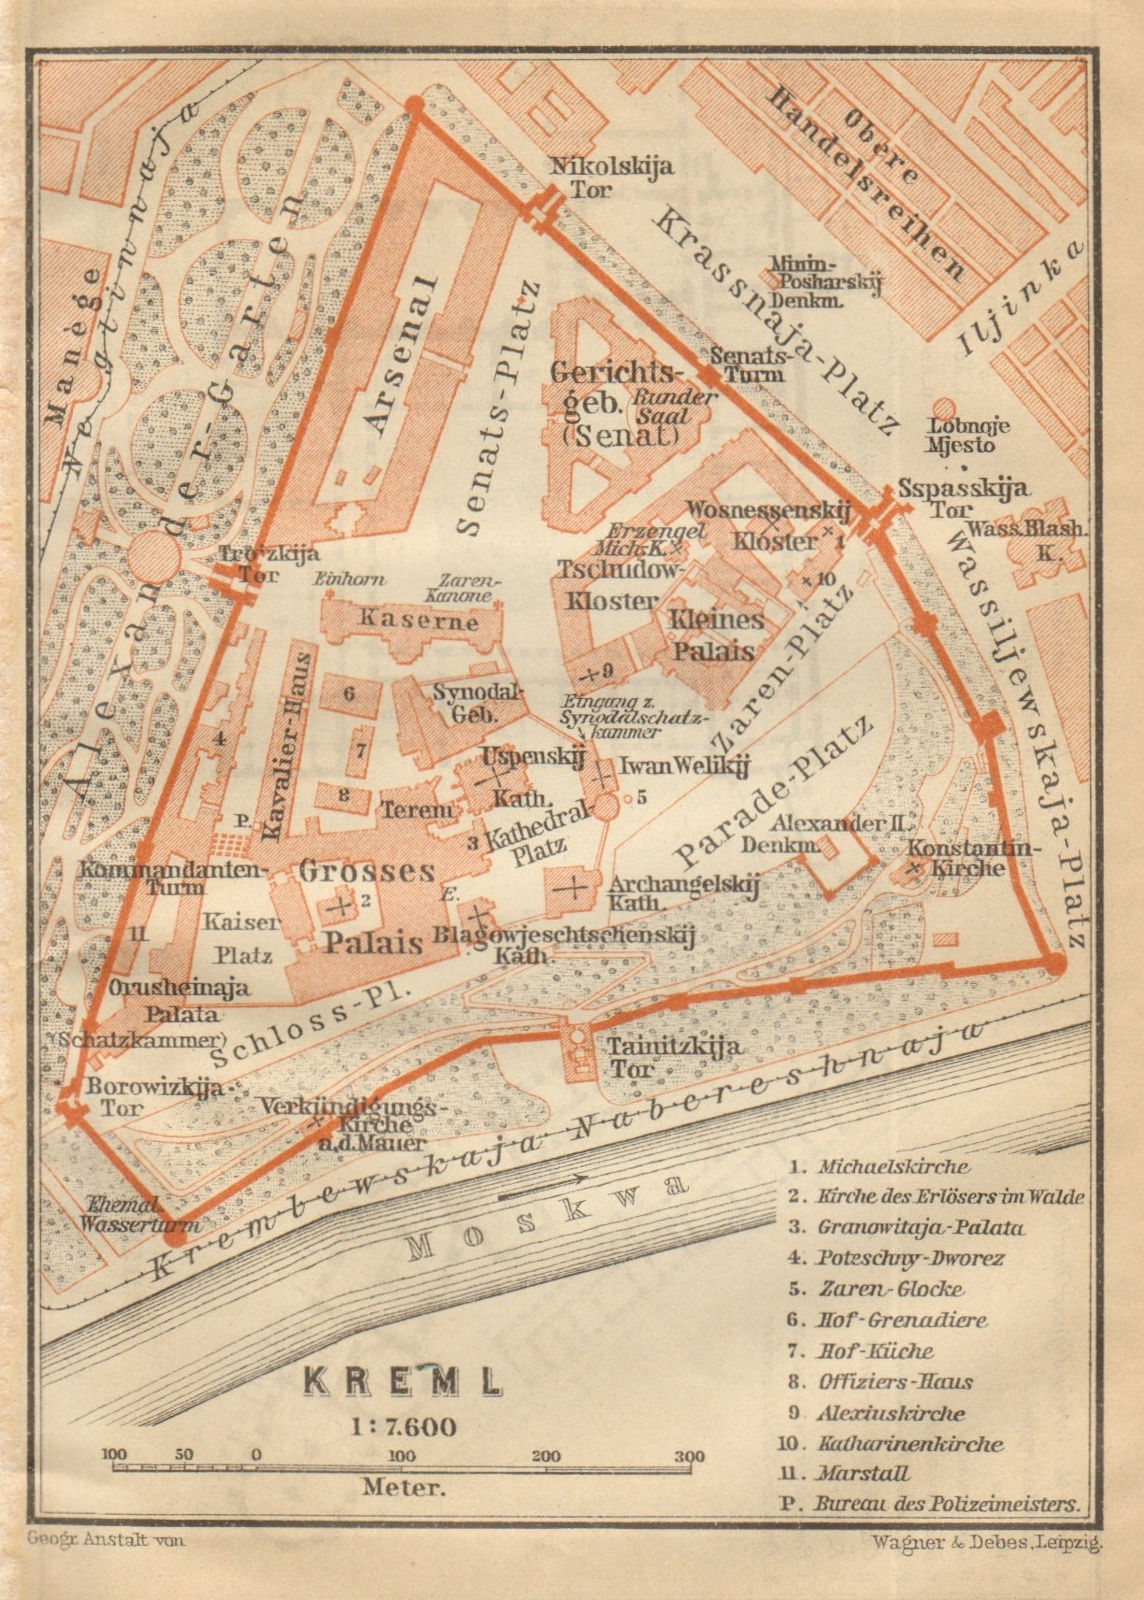 Associate Product Kremlin ground/floor plan. Moscow, Russia. BAEDEKER 1912 old antique map chart